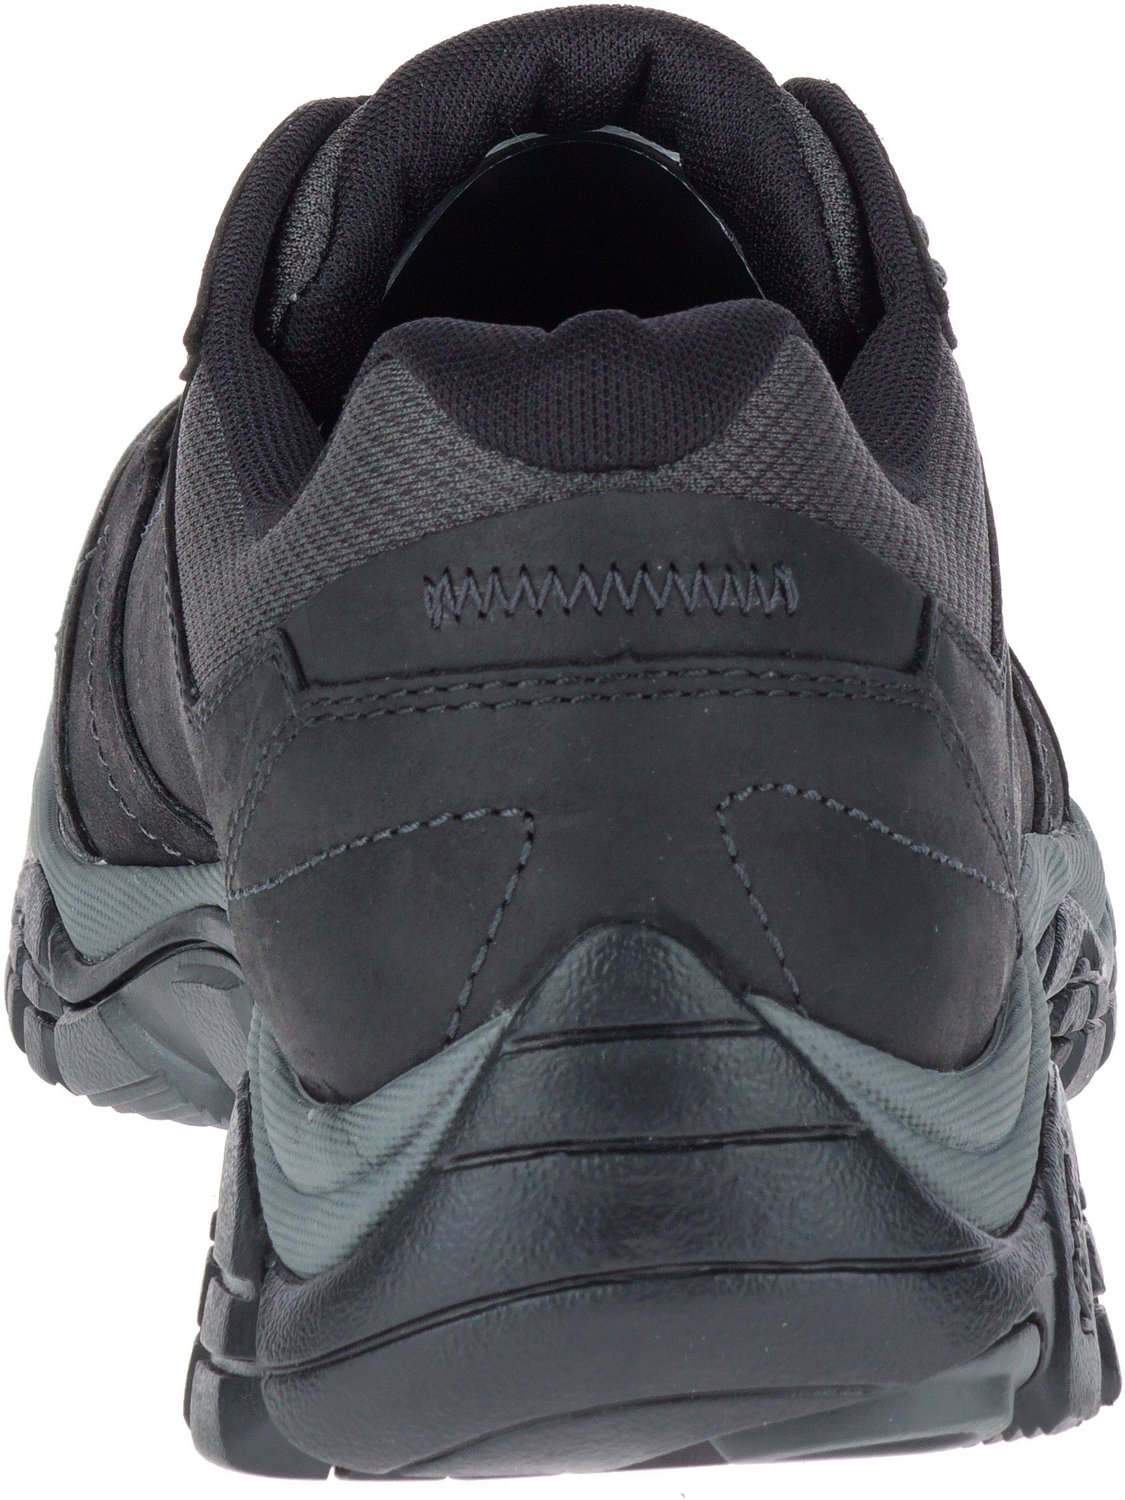 Merrell Men's Moab Adventure Lace Up Shoes | Academy